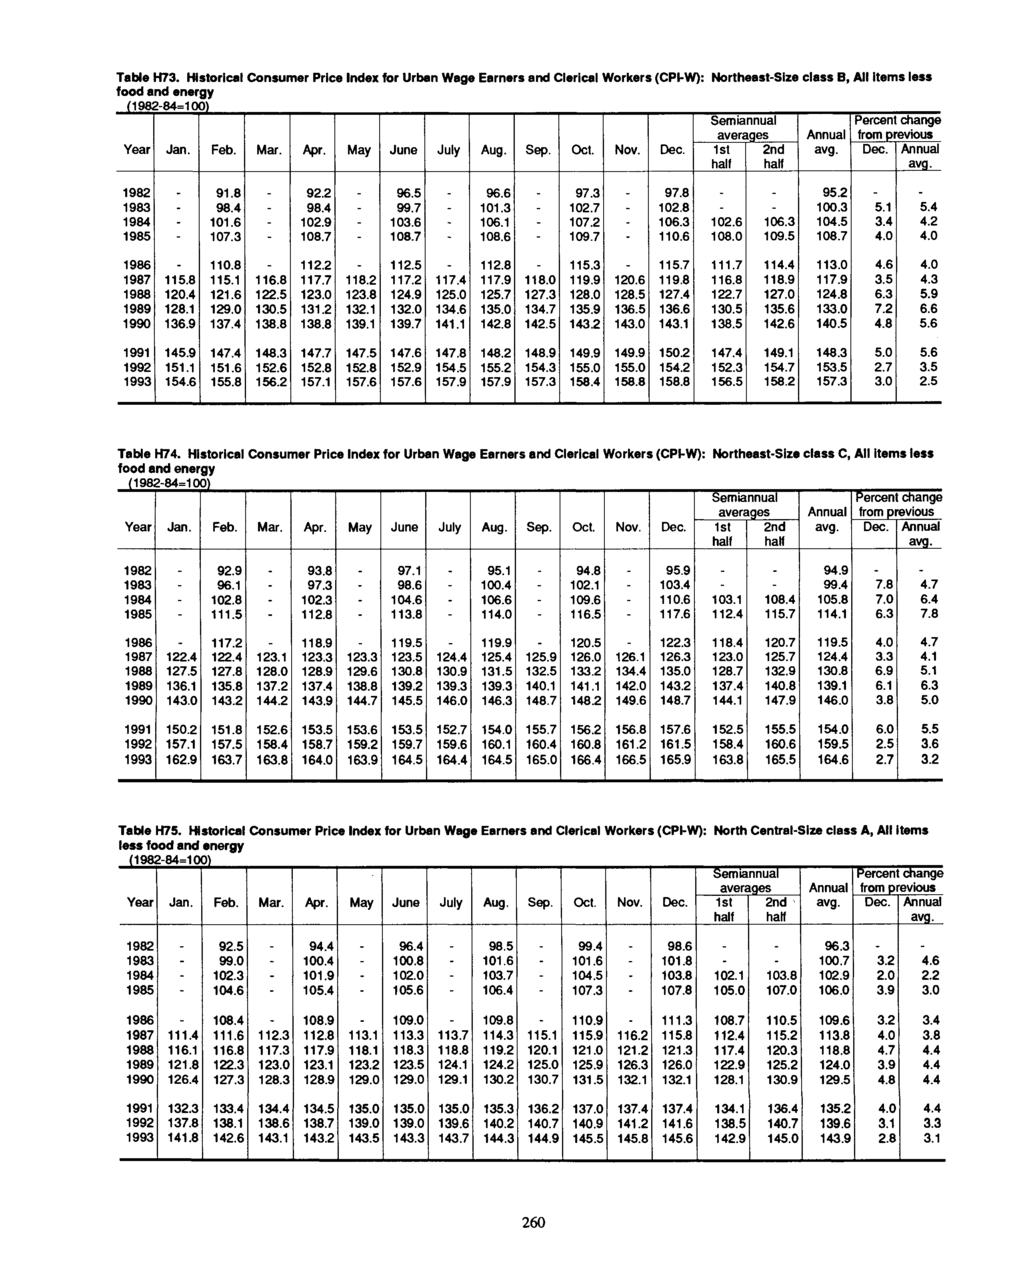 Table H73. Historical Consumer Price for Urban Wage Earners and Clerical Workers (CPI-W): Northeast-Size class B, All items less food and energy (1982-84=100) Year Feb. Mar. Apr. May June July Aug.